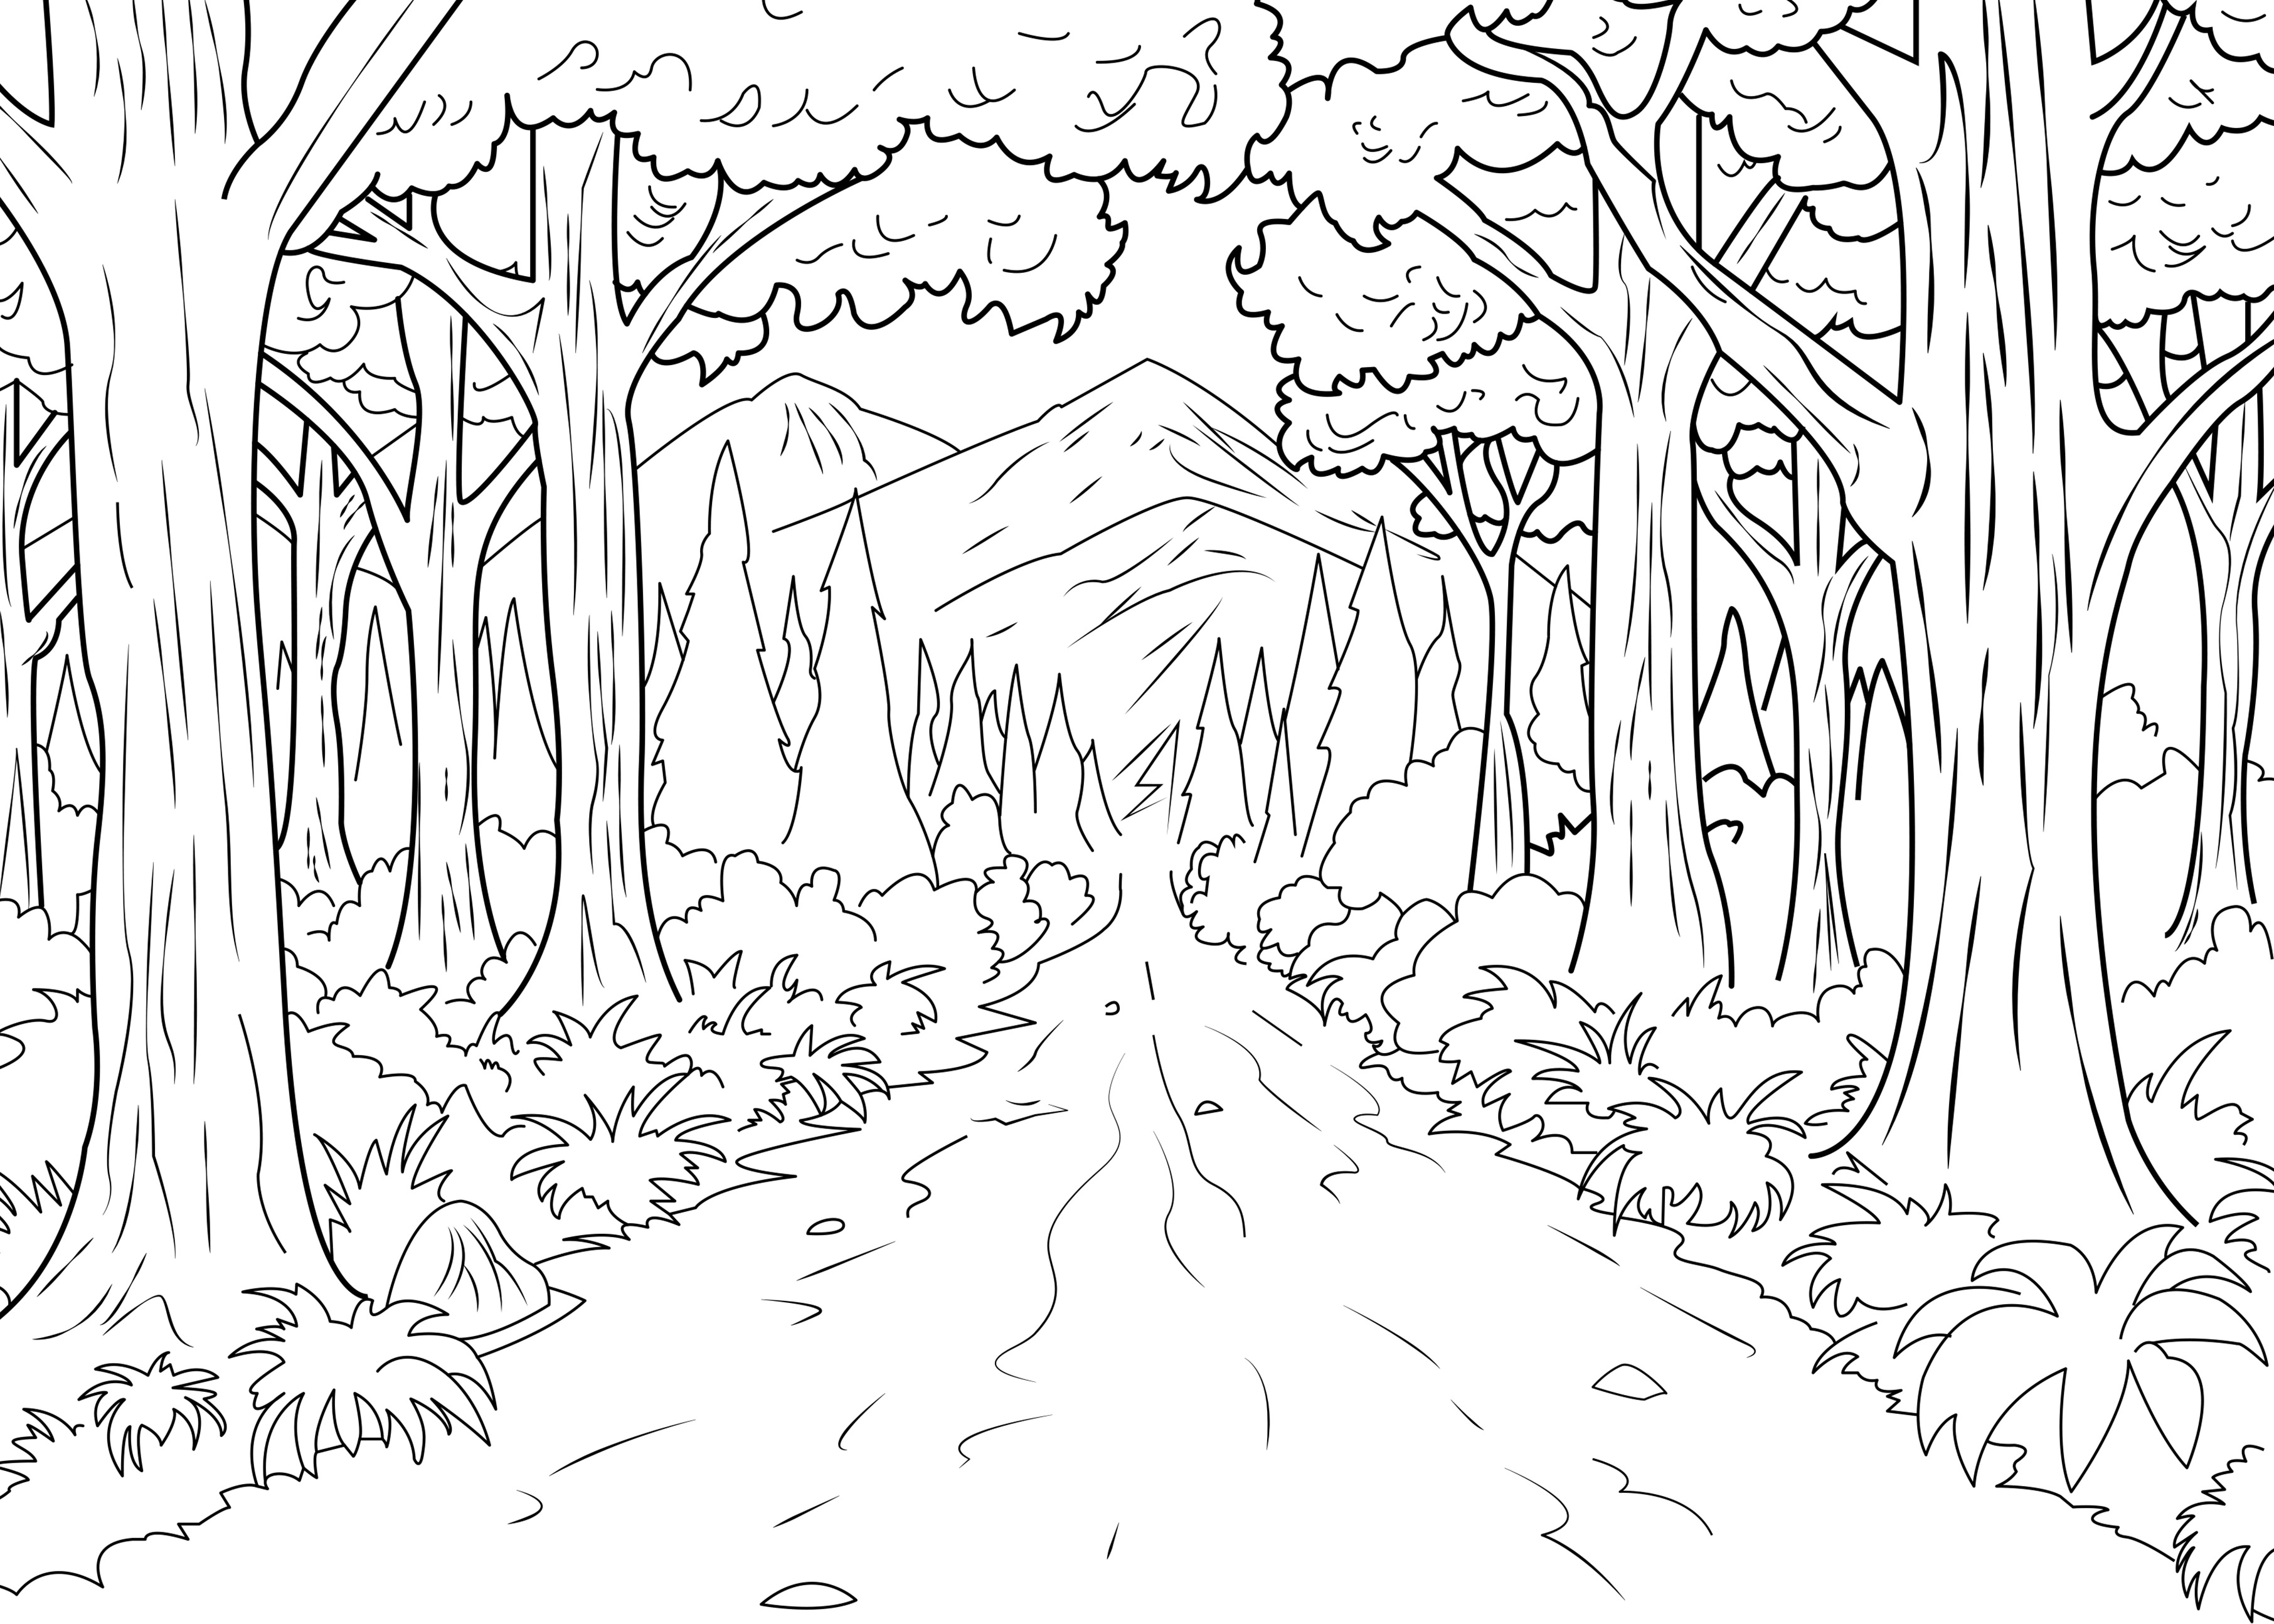 A coloring page of forest made by Celine